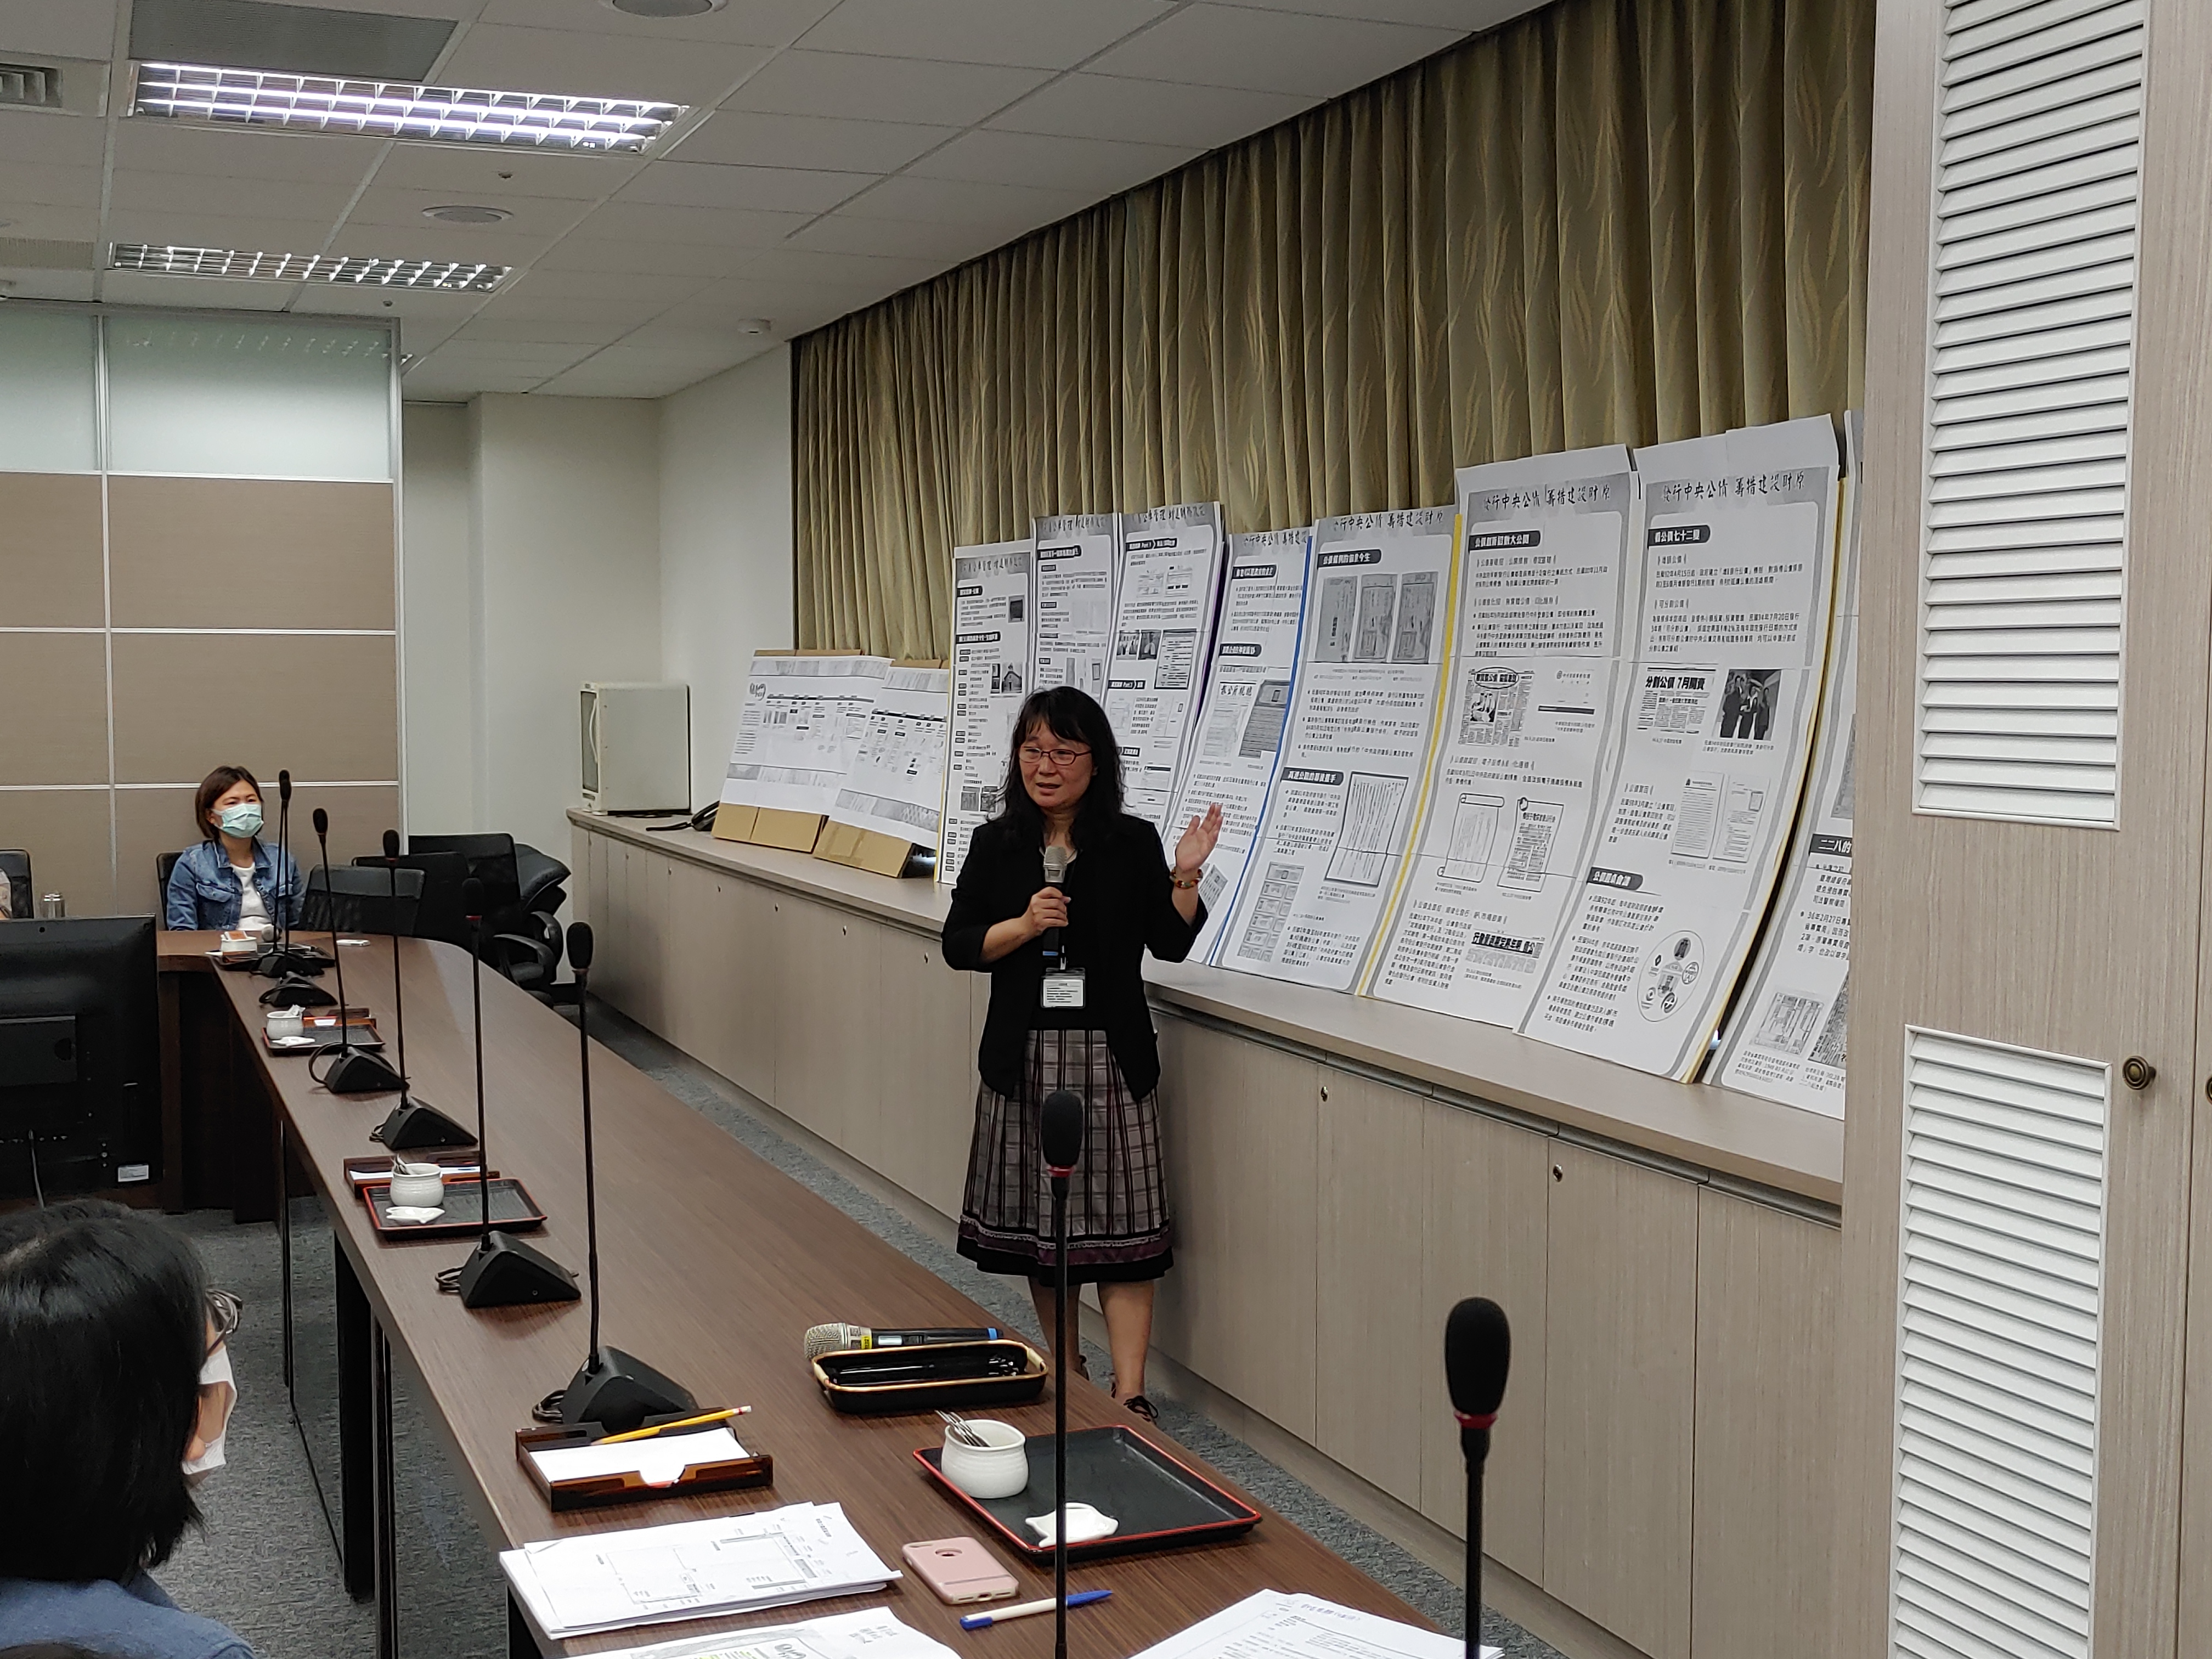 Picture 2: Ms. Chang, I-Hsin, Deputy Director of the National Treasury Administration, rehearses for the guided tour.